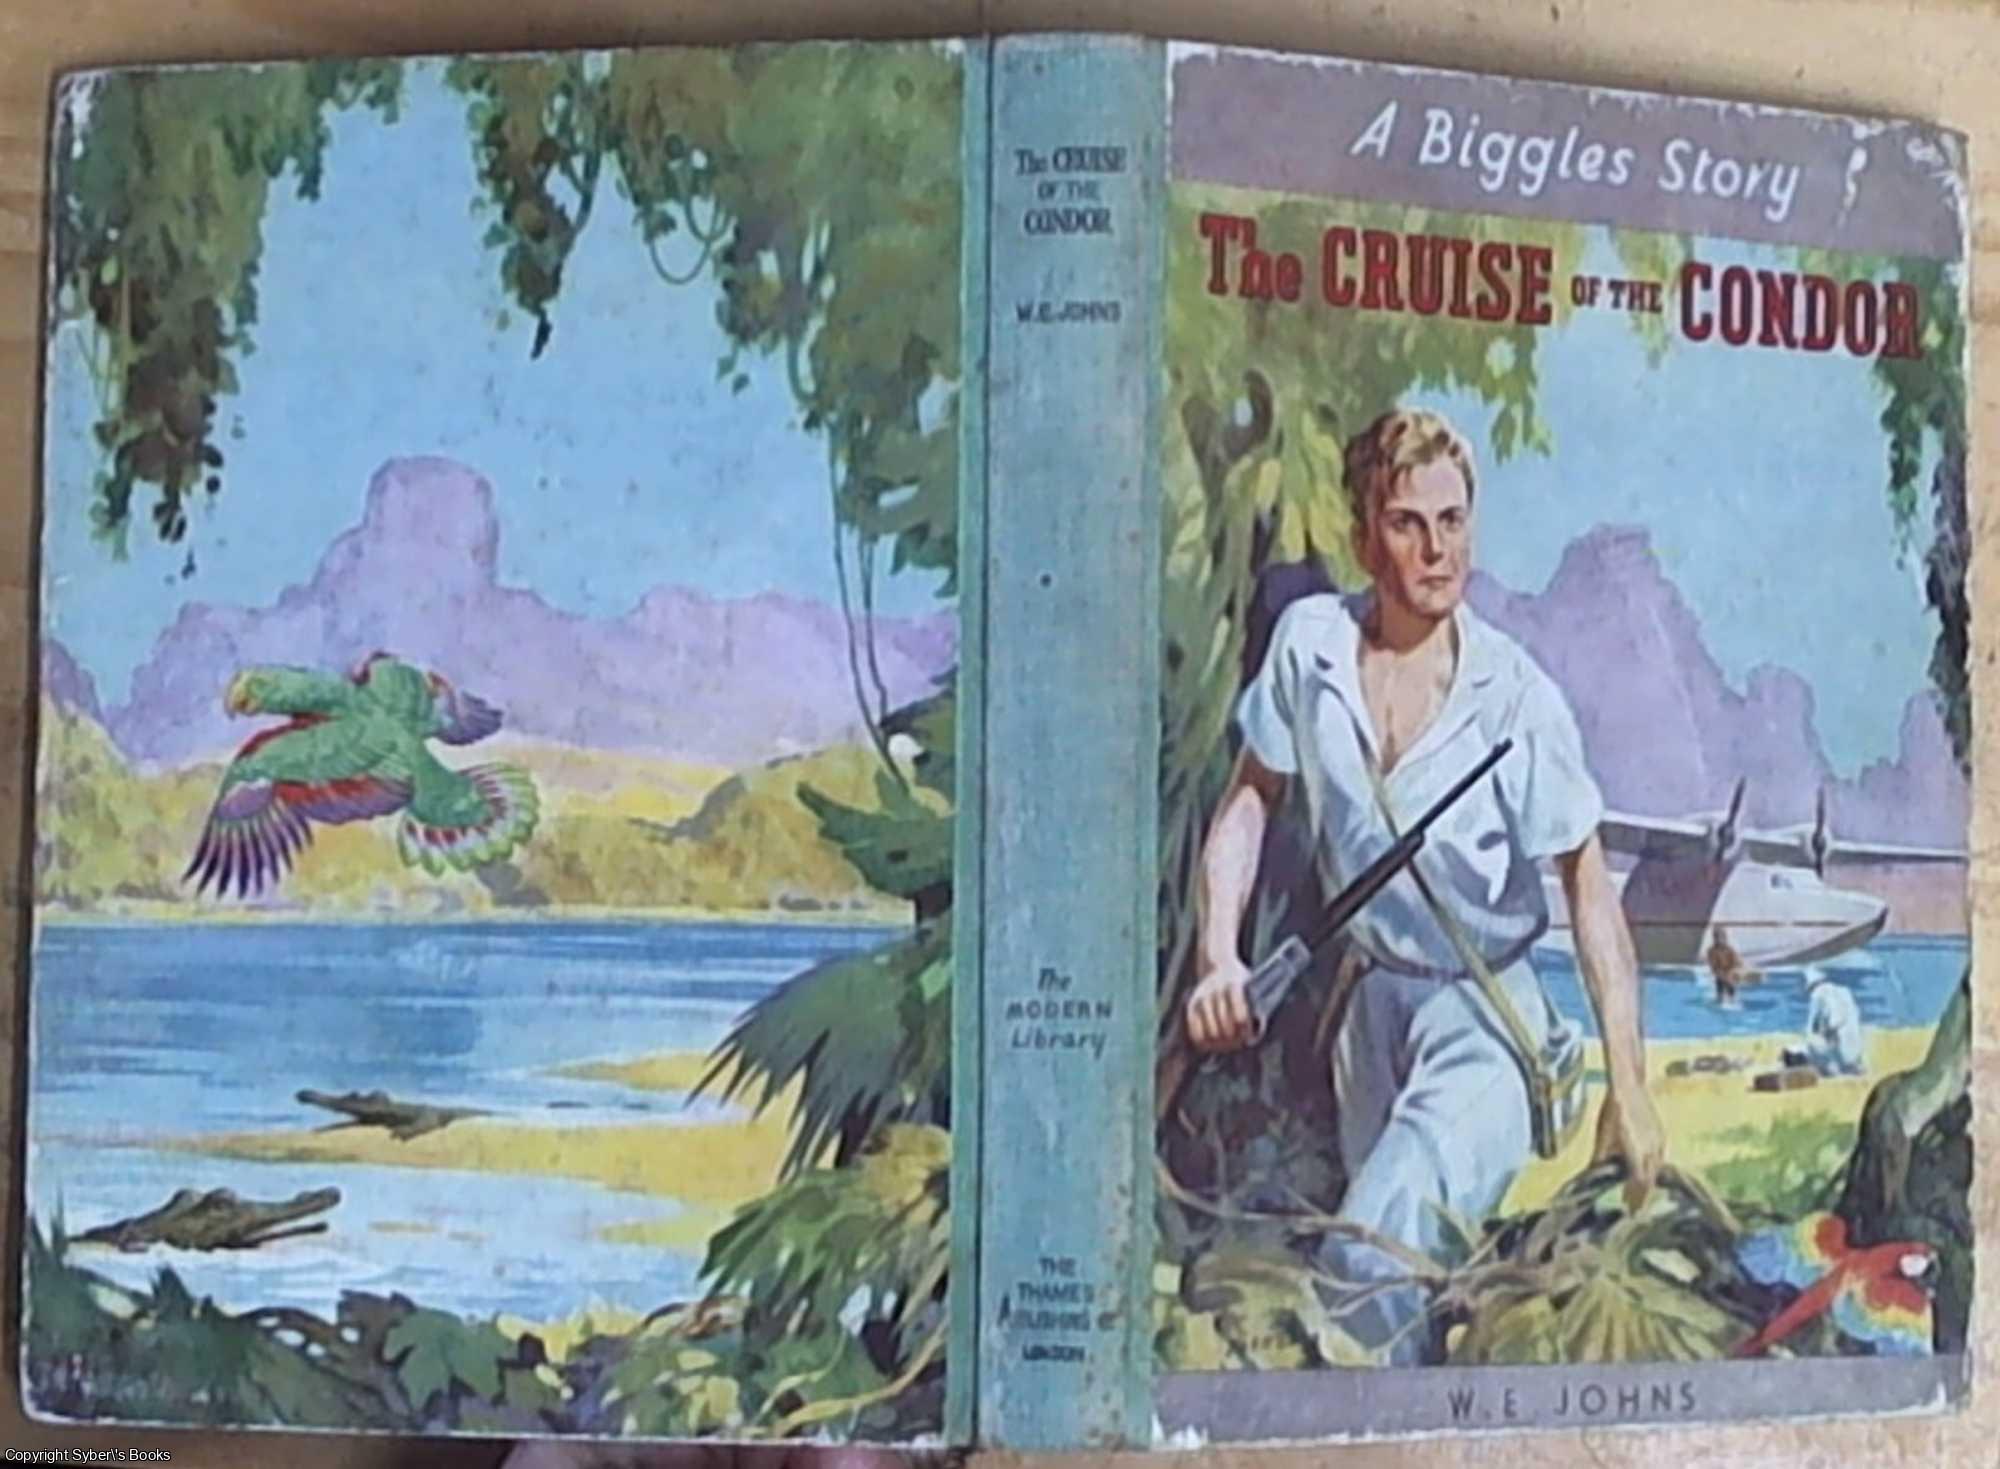 Johns, Capt W. E. (William Earle) - The Cruise of the Condor: A Biggles Story